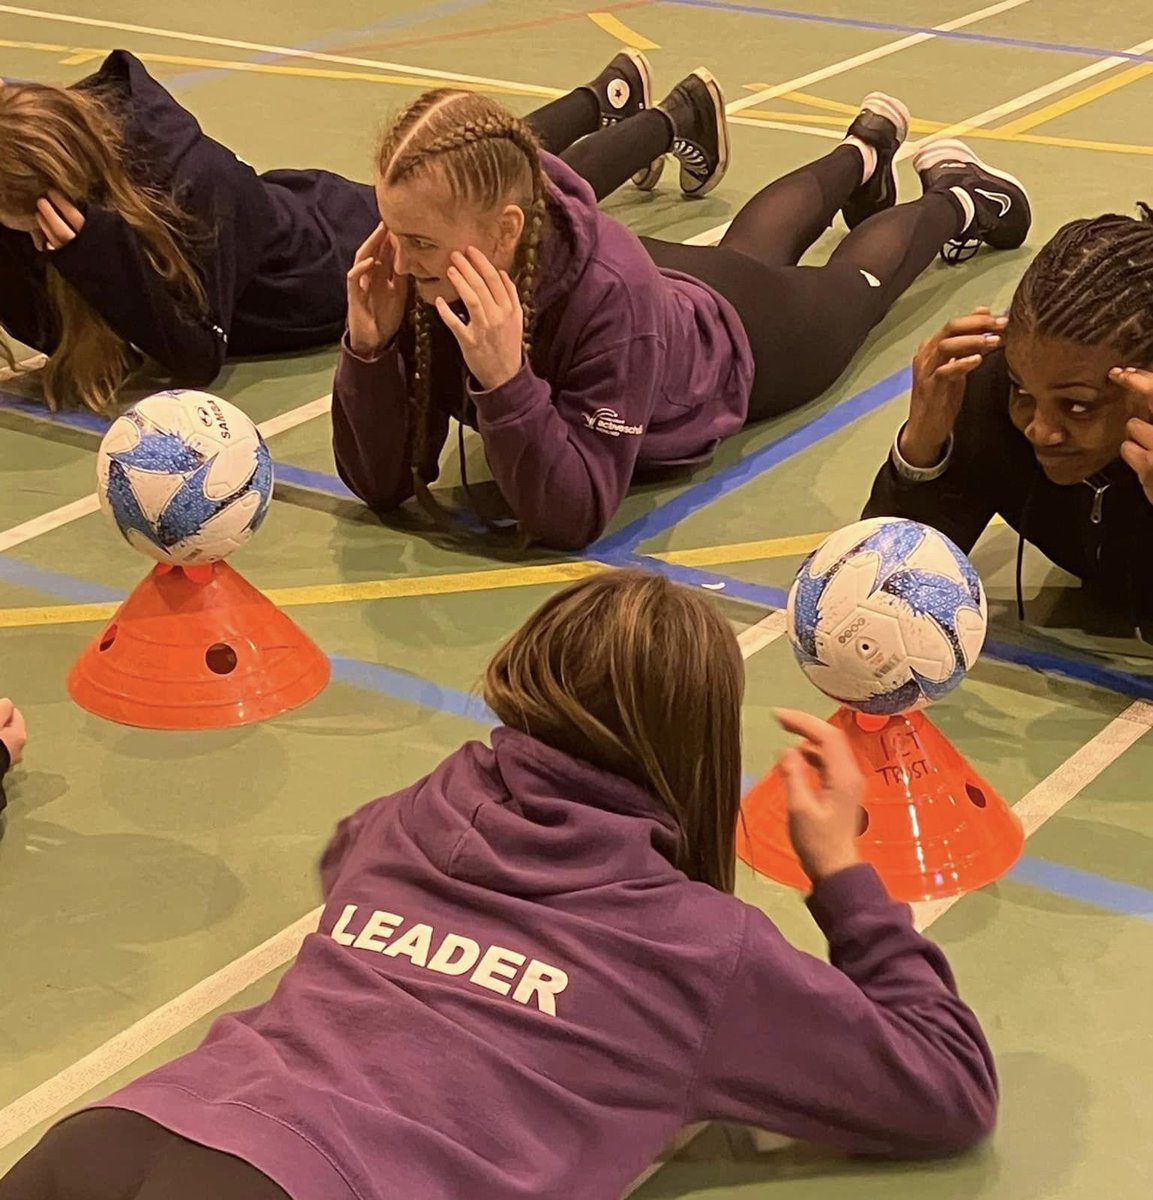 ❤️⚽️💙FOOTBALL LEADERS with @ICTFC Community Trust. An afternoon of fun #Leadership skills with #Communitycoaches. Open to all secondary pupils. Friday March 8th 2-5pm Raigmore Com Centre. Info Elizabeth.McDonald@Highlifehighland.com Leadership Dev Officer #HLHMakingLifeBetter ⚽️